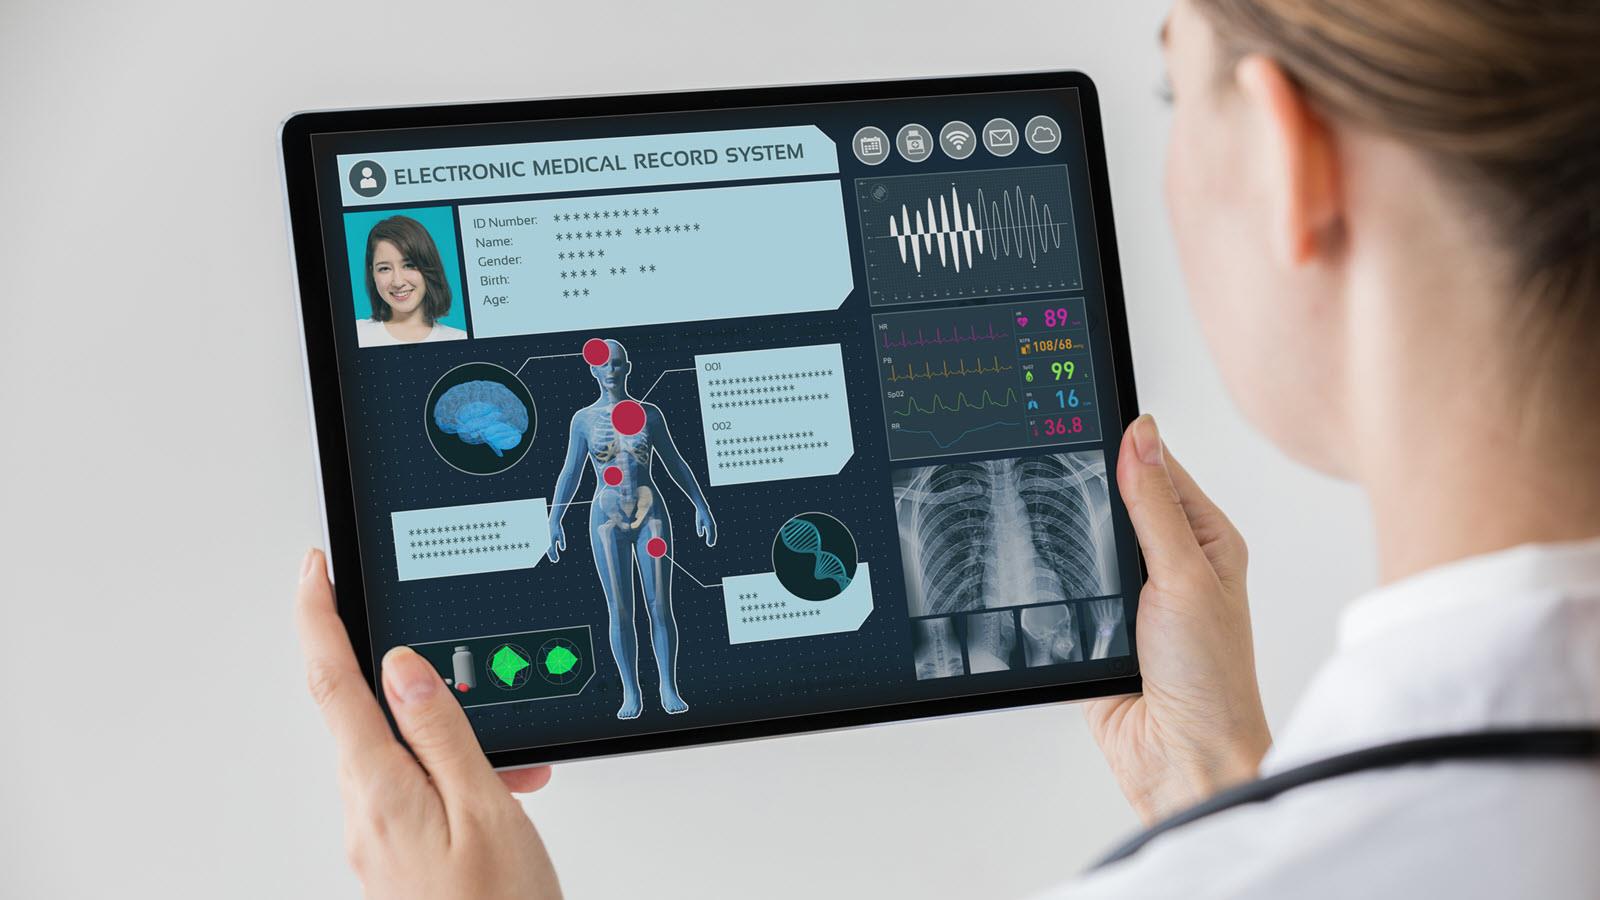 Nurse looks at an electronic medical record on a tablet device